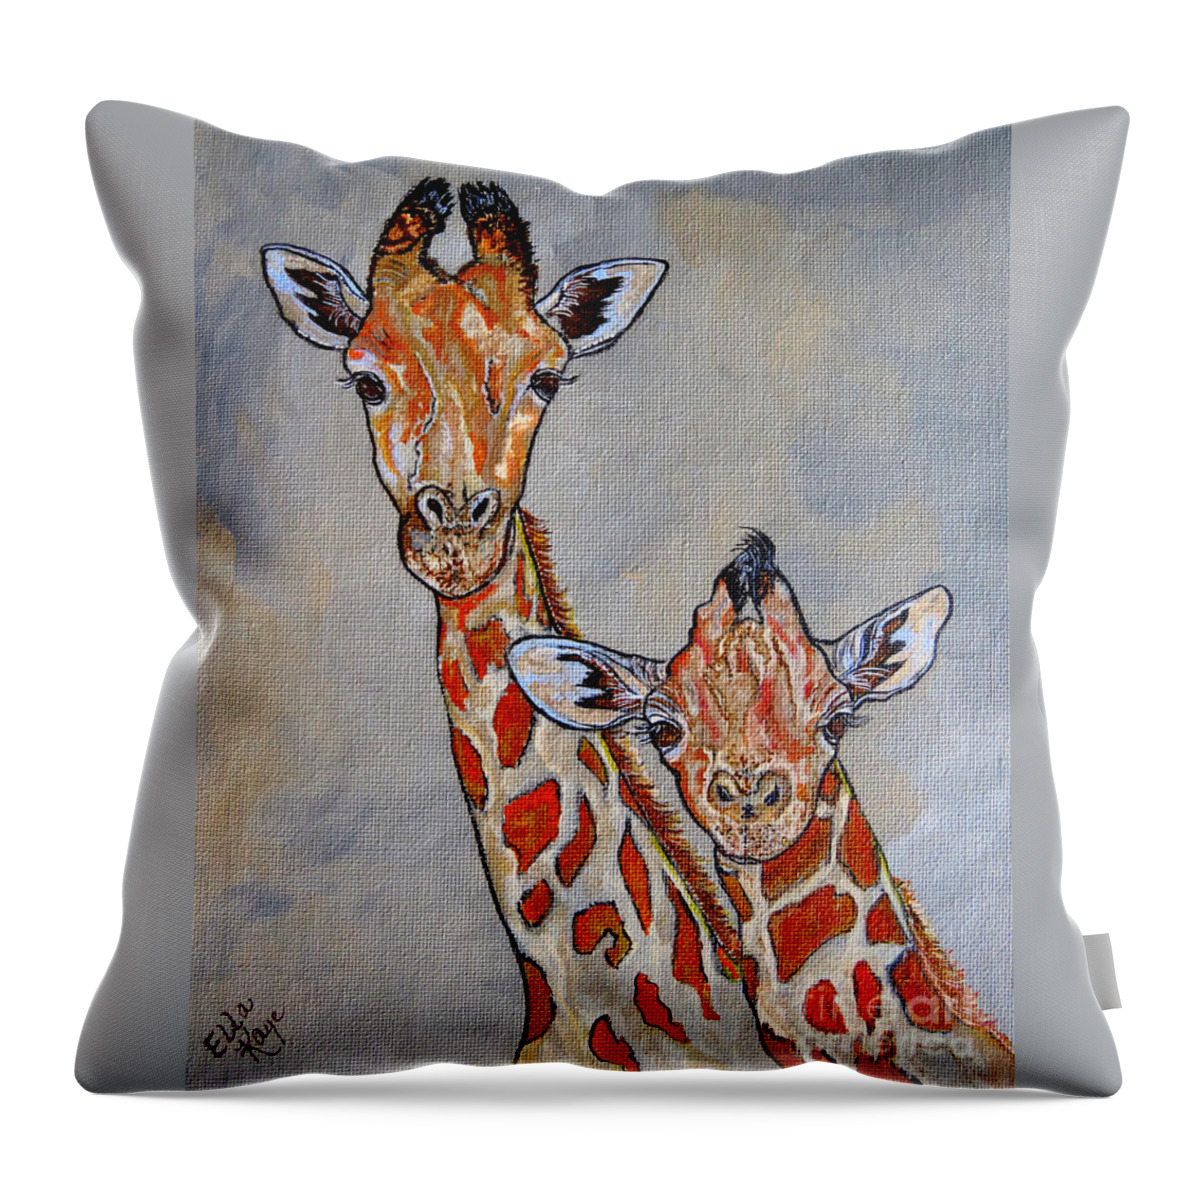 Giraffe Throw Pillow featuring the painting Giraffes - Standing Side by Side by Ella Kaye Dickey